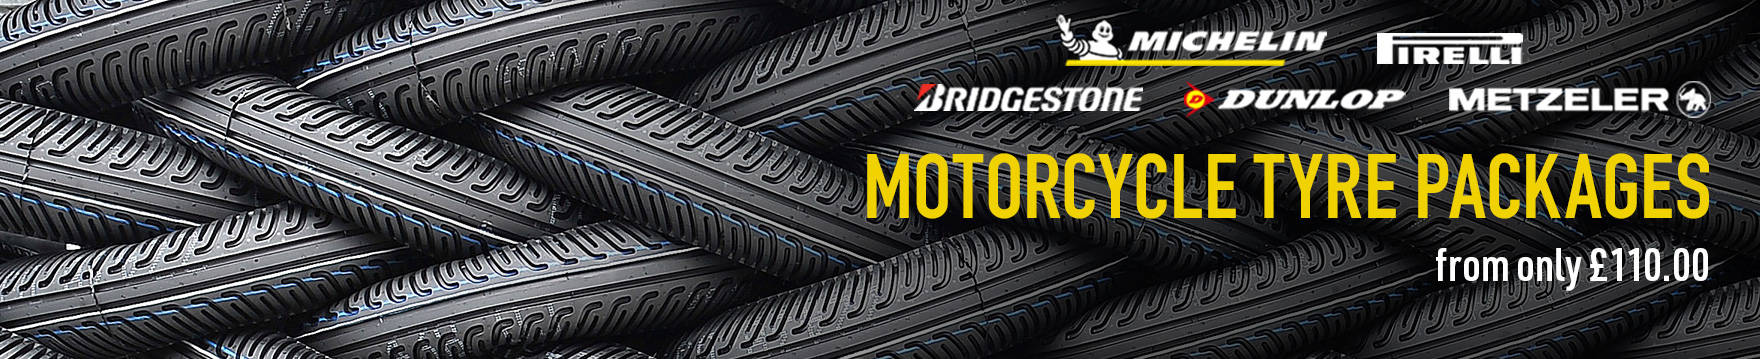 Motorcycle Tyre Packages